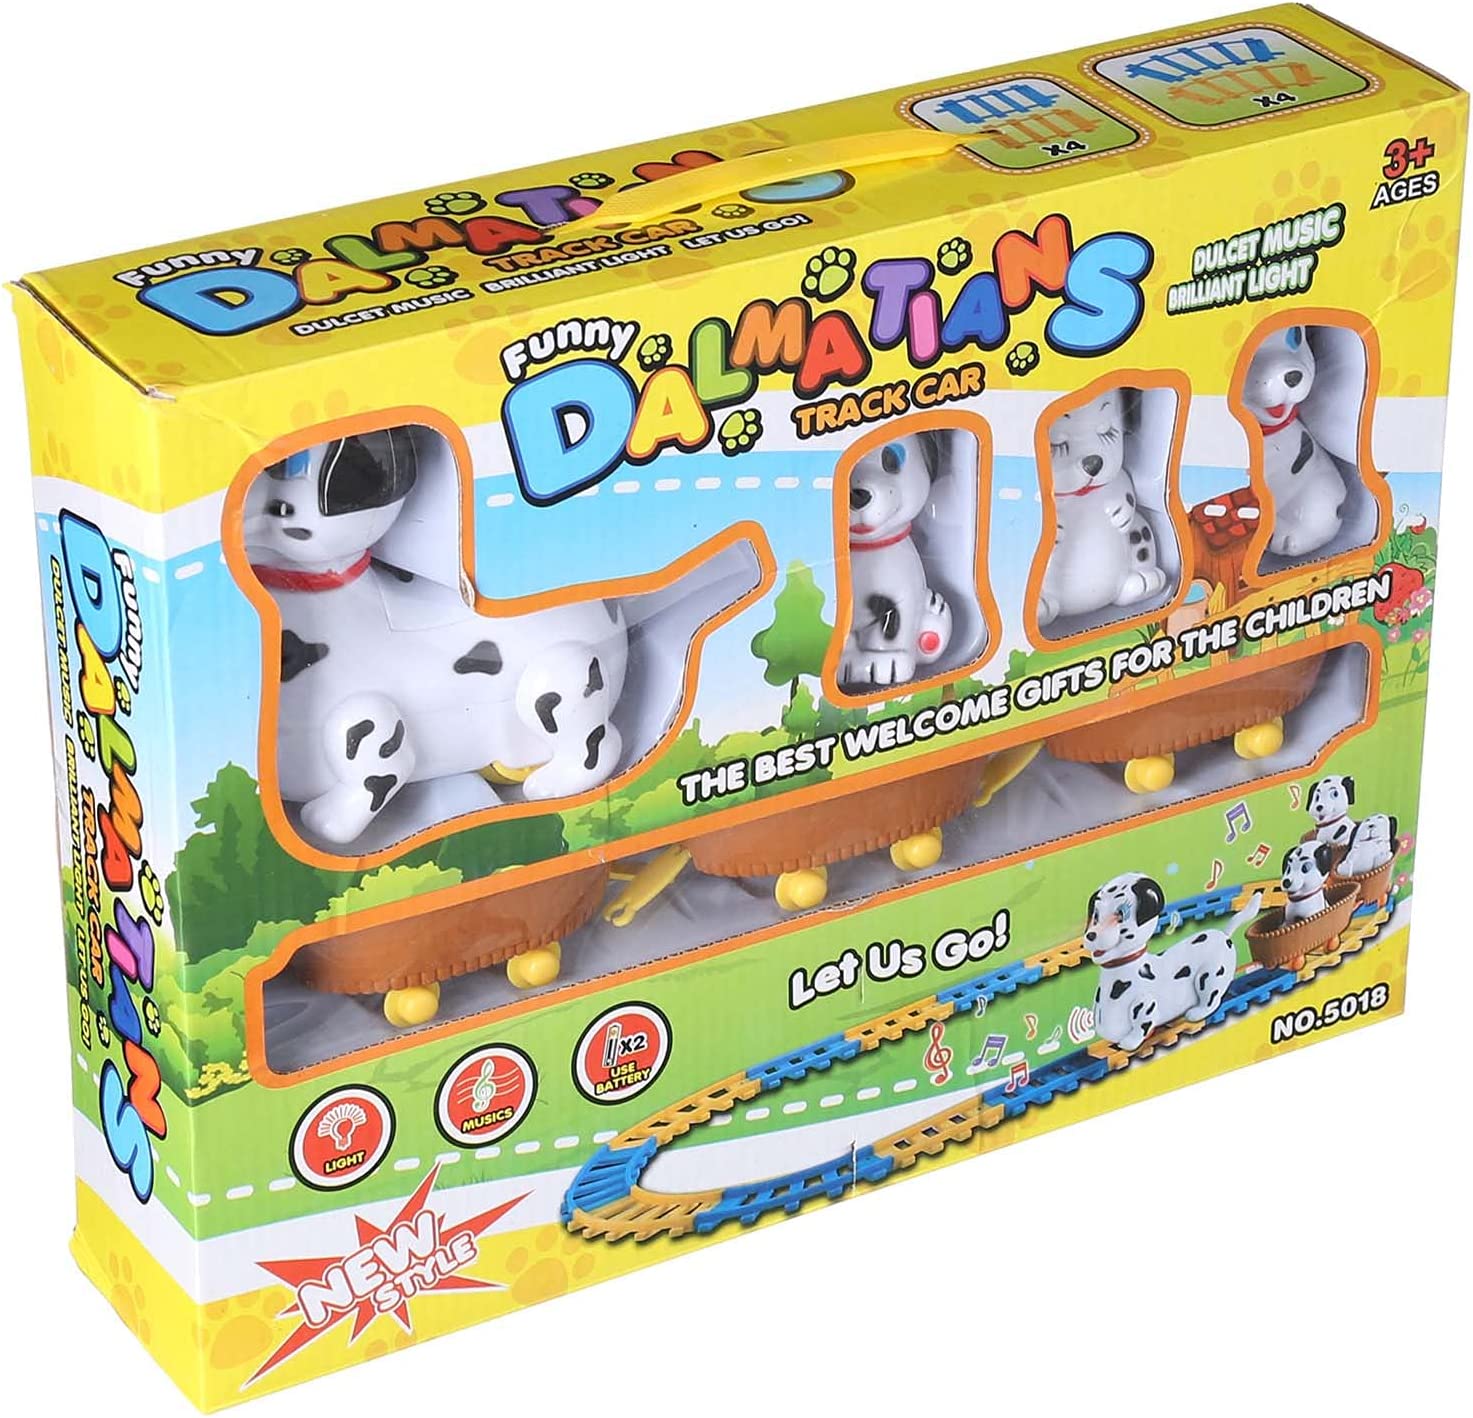 Dalmatians Track Car Set With Light And Sounds